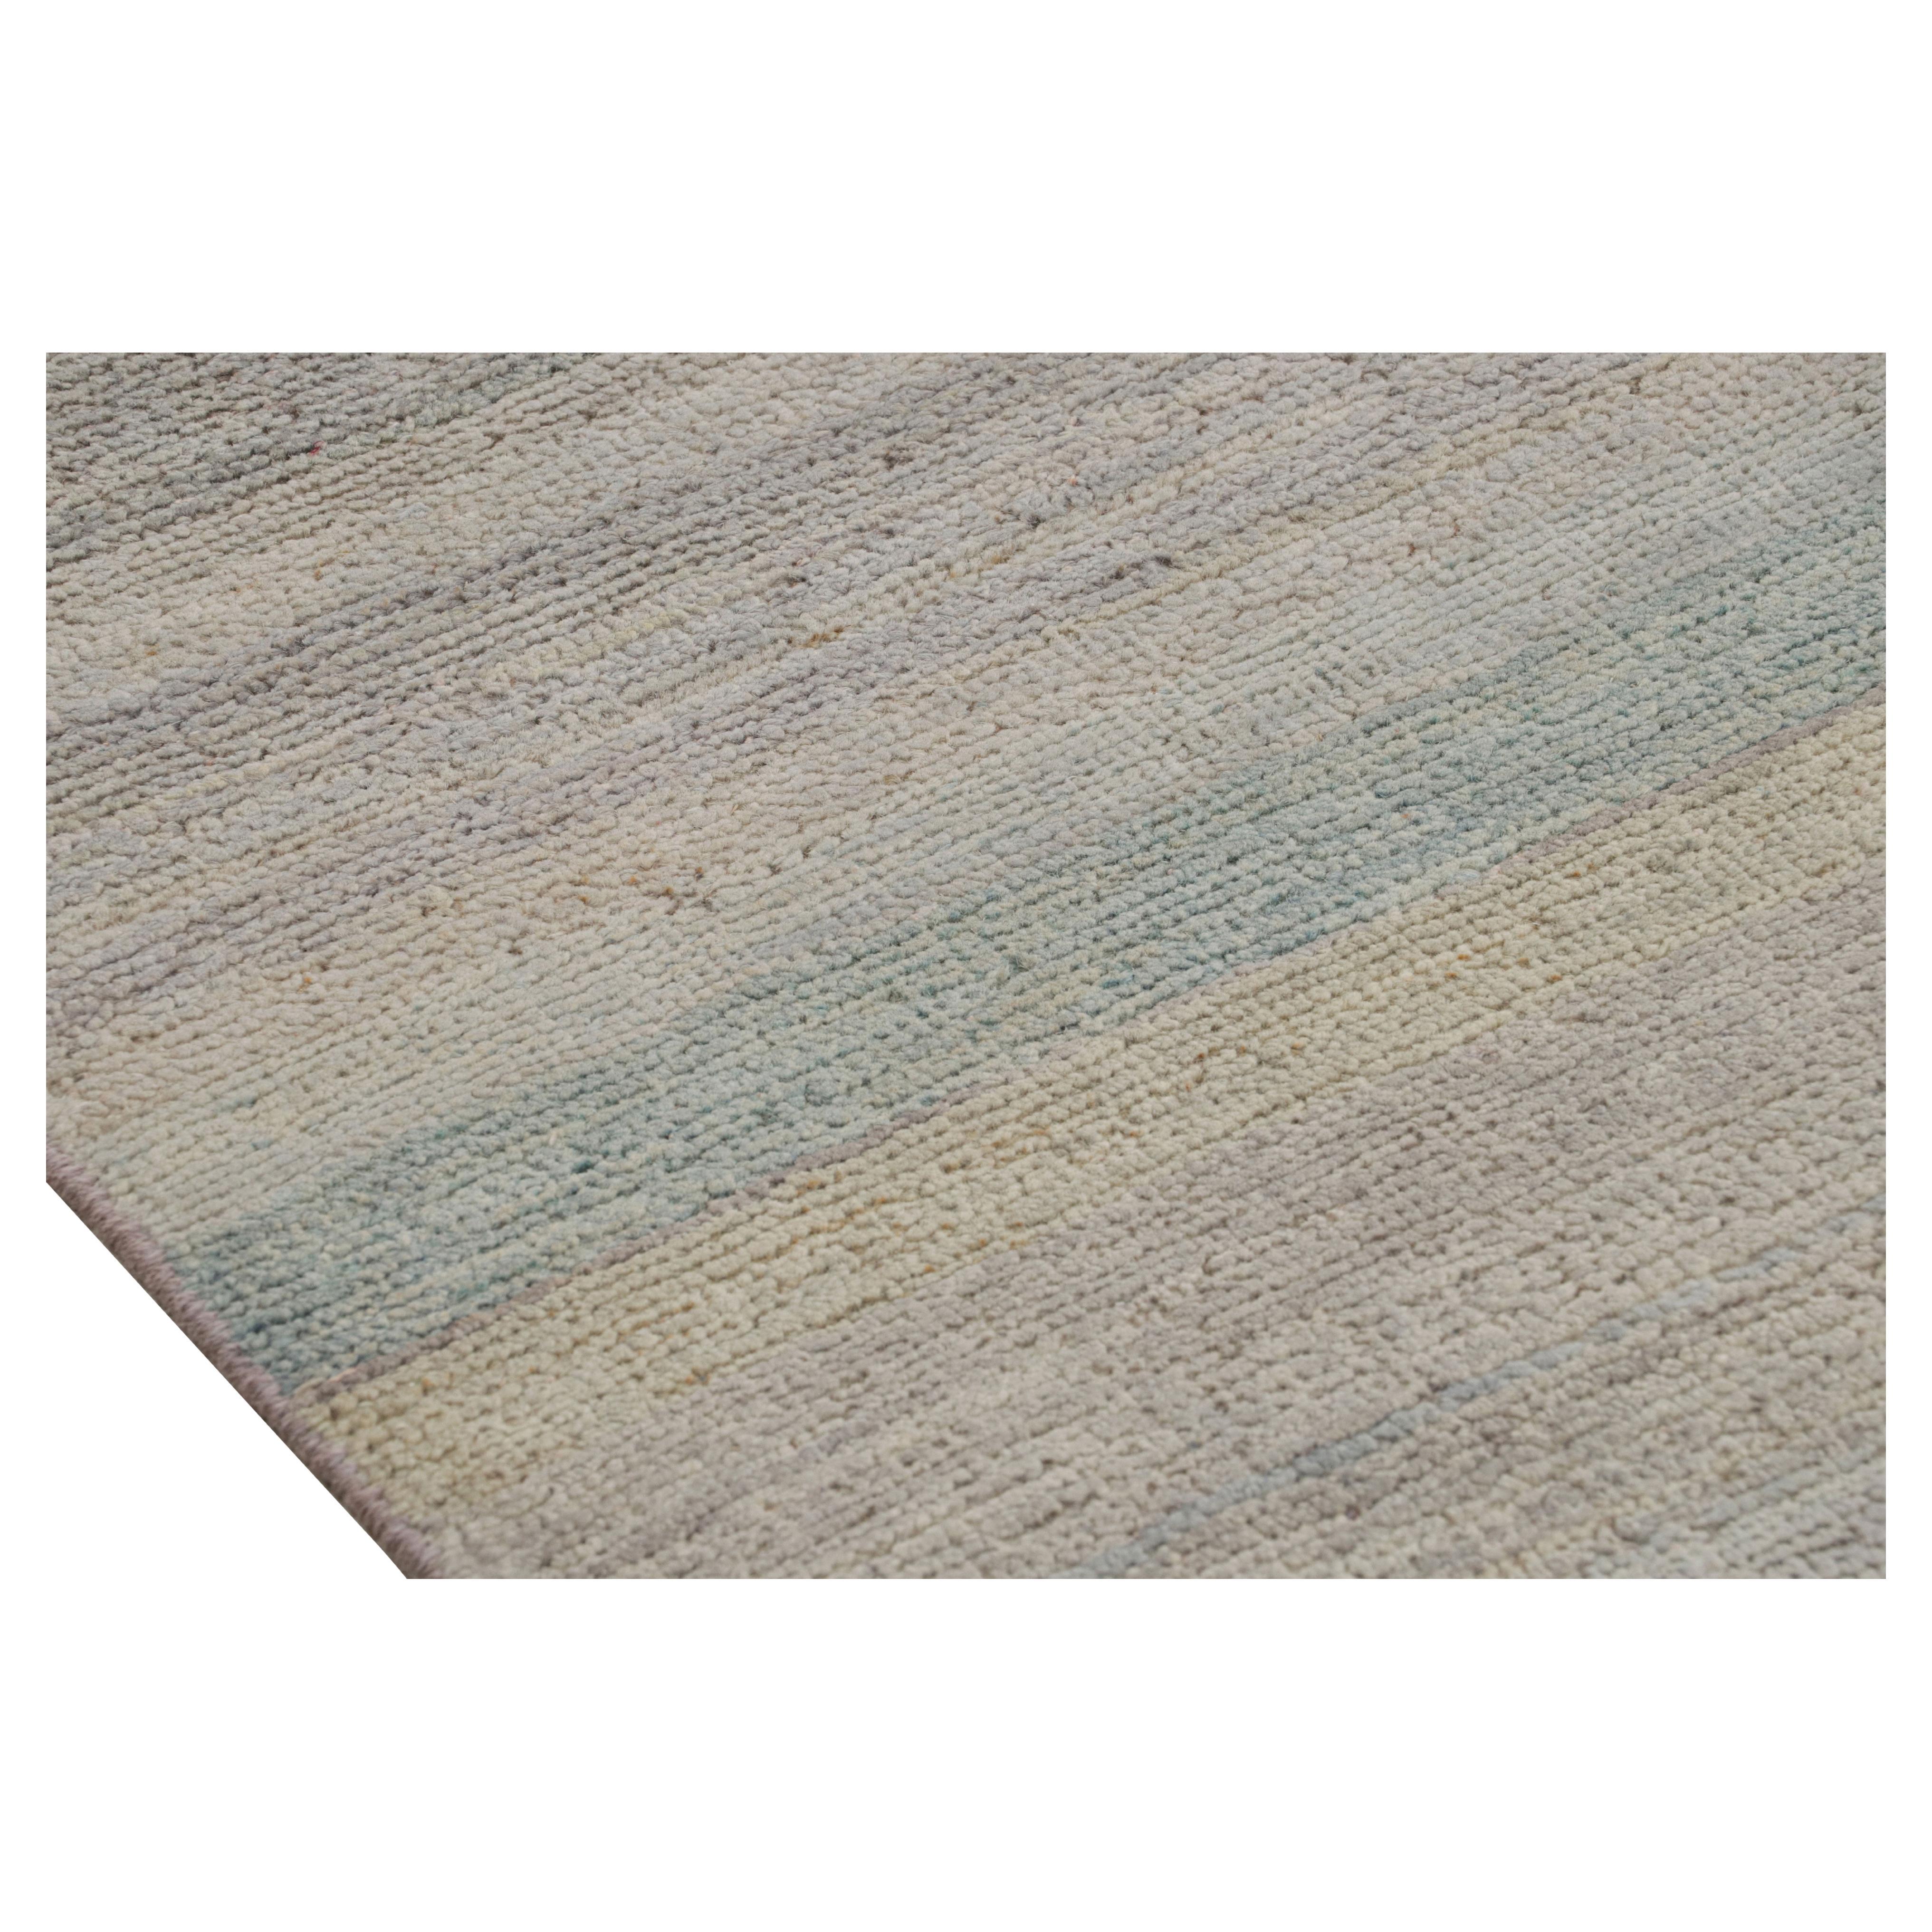 Rug & Kilim’s Textural Rug in Beige and Light Blue Stripes and Striae